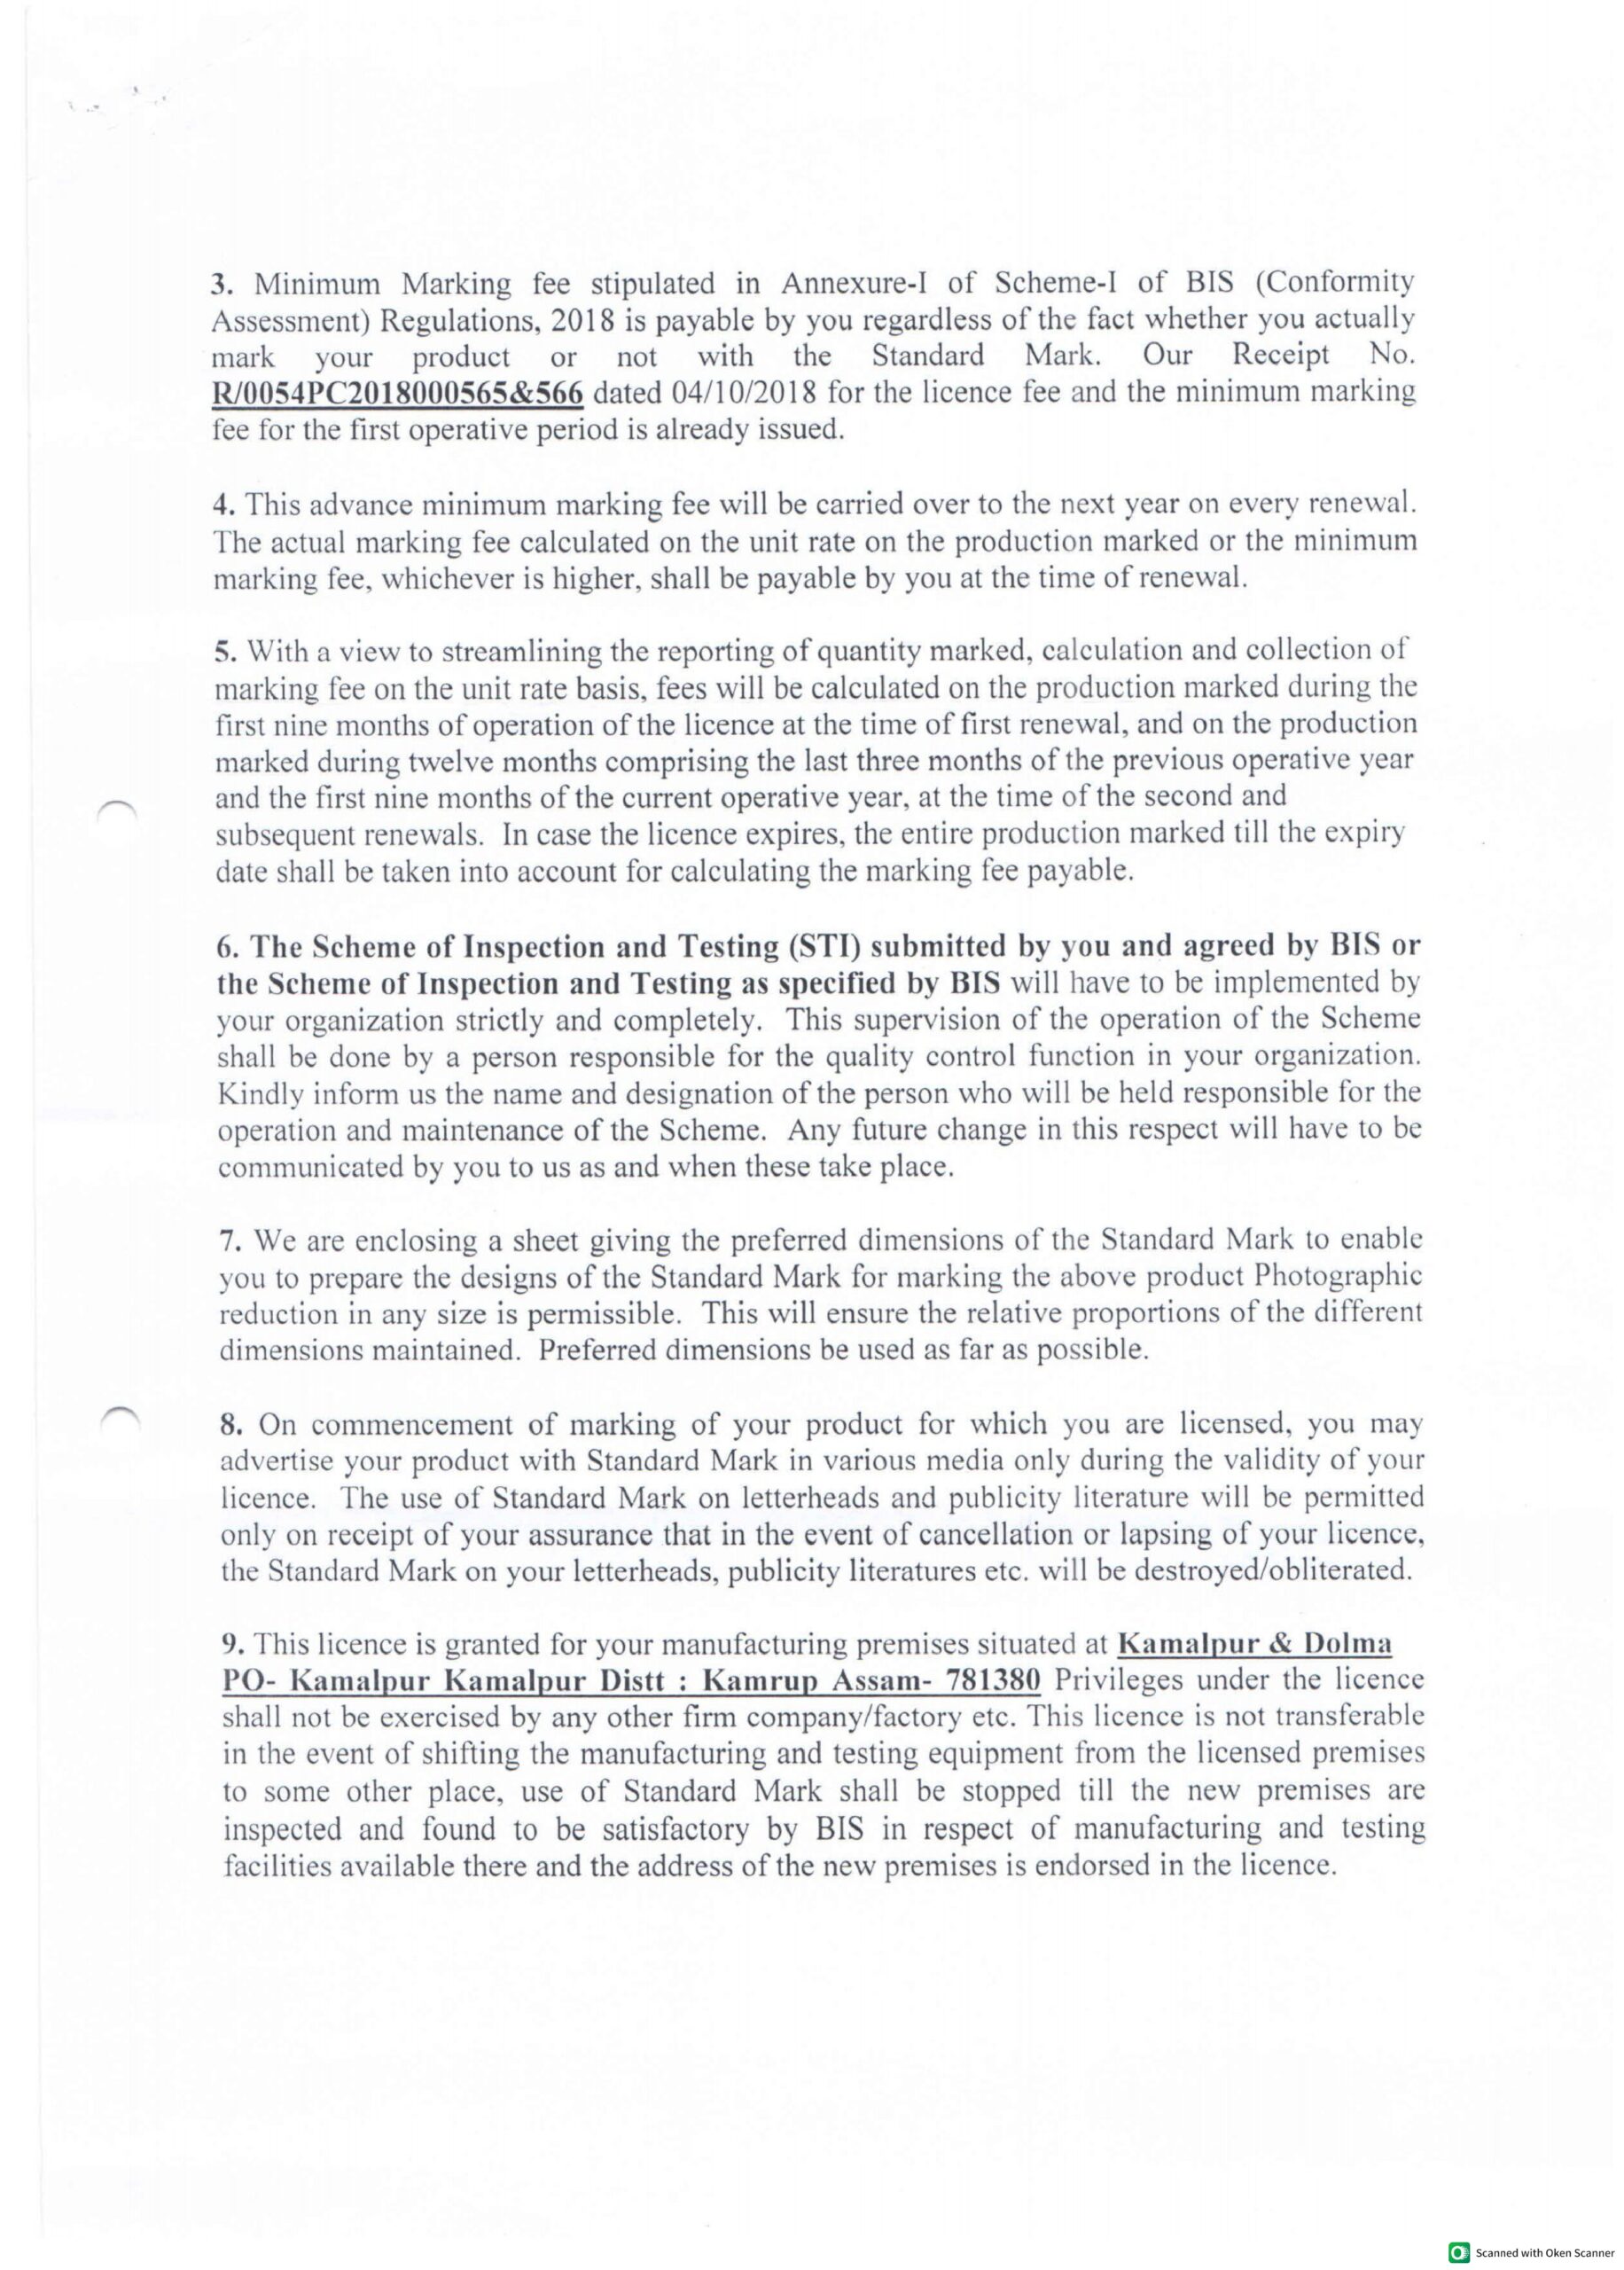 Eco Tech Papers BIS License page 2